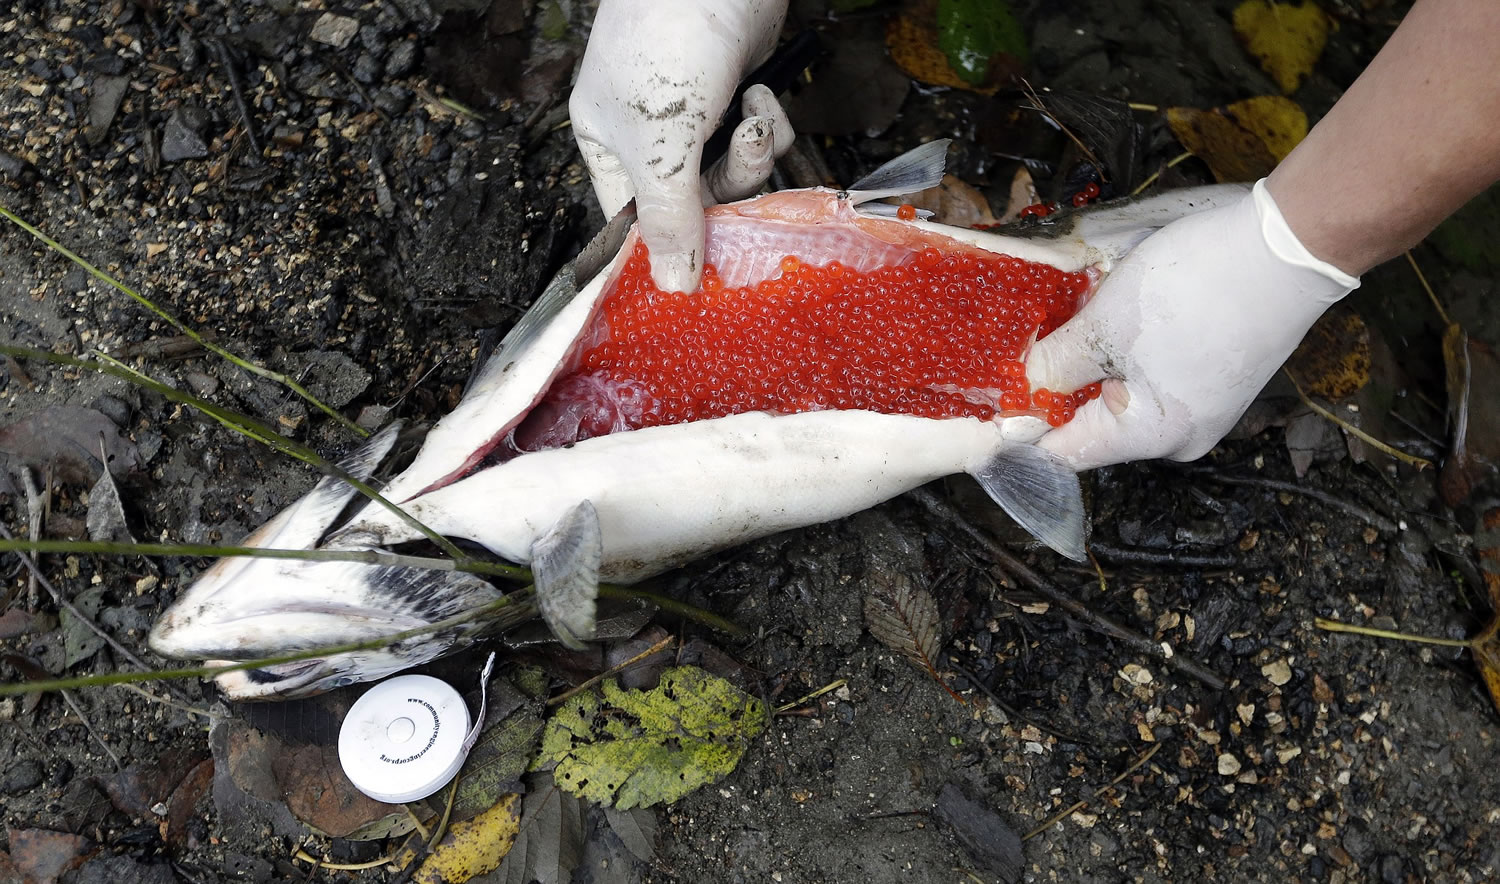 A researcher slices open the belly of a female coho found dead in Seattle's Longfellow Creek to reveal she was still full of eggs and had not spawned.